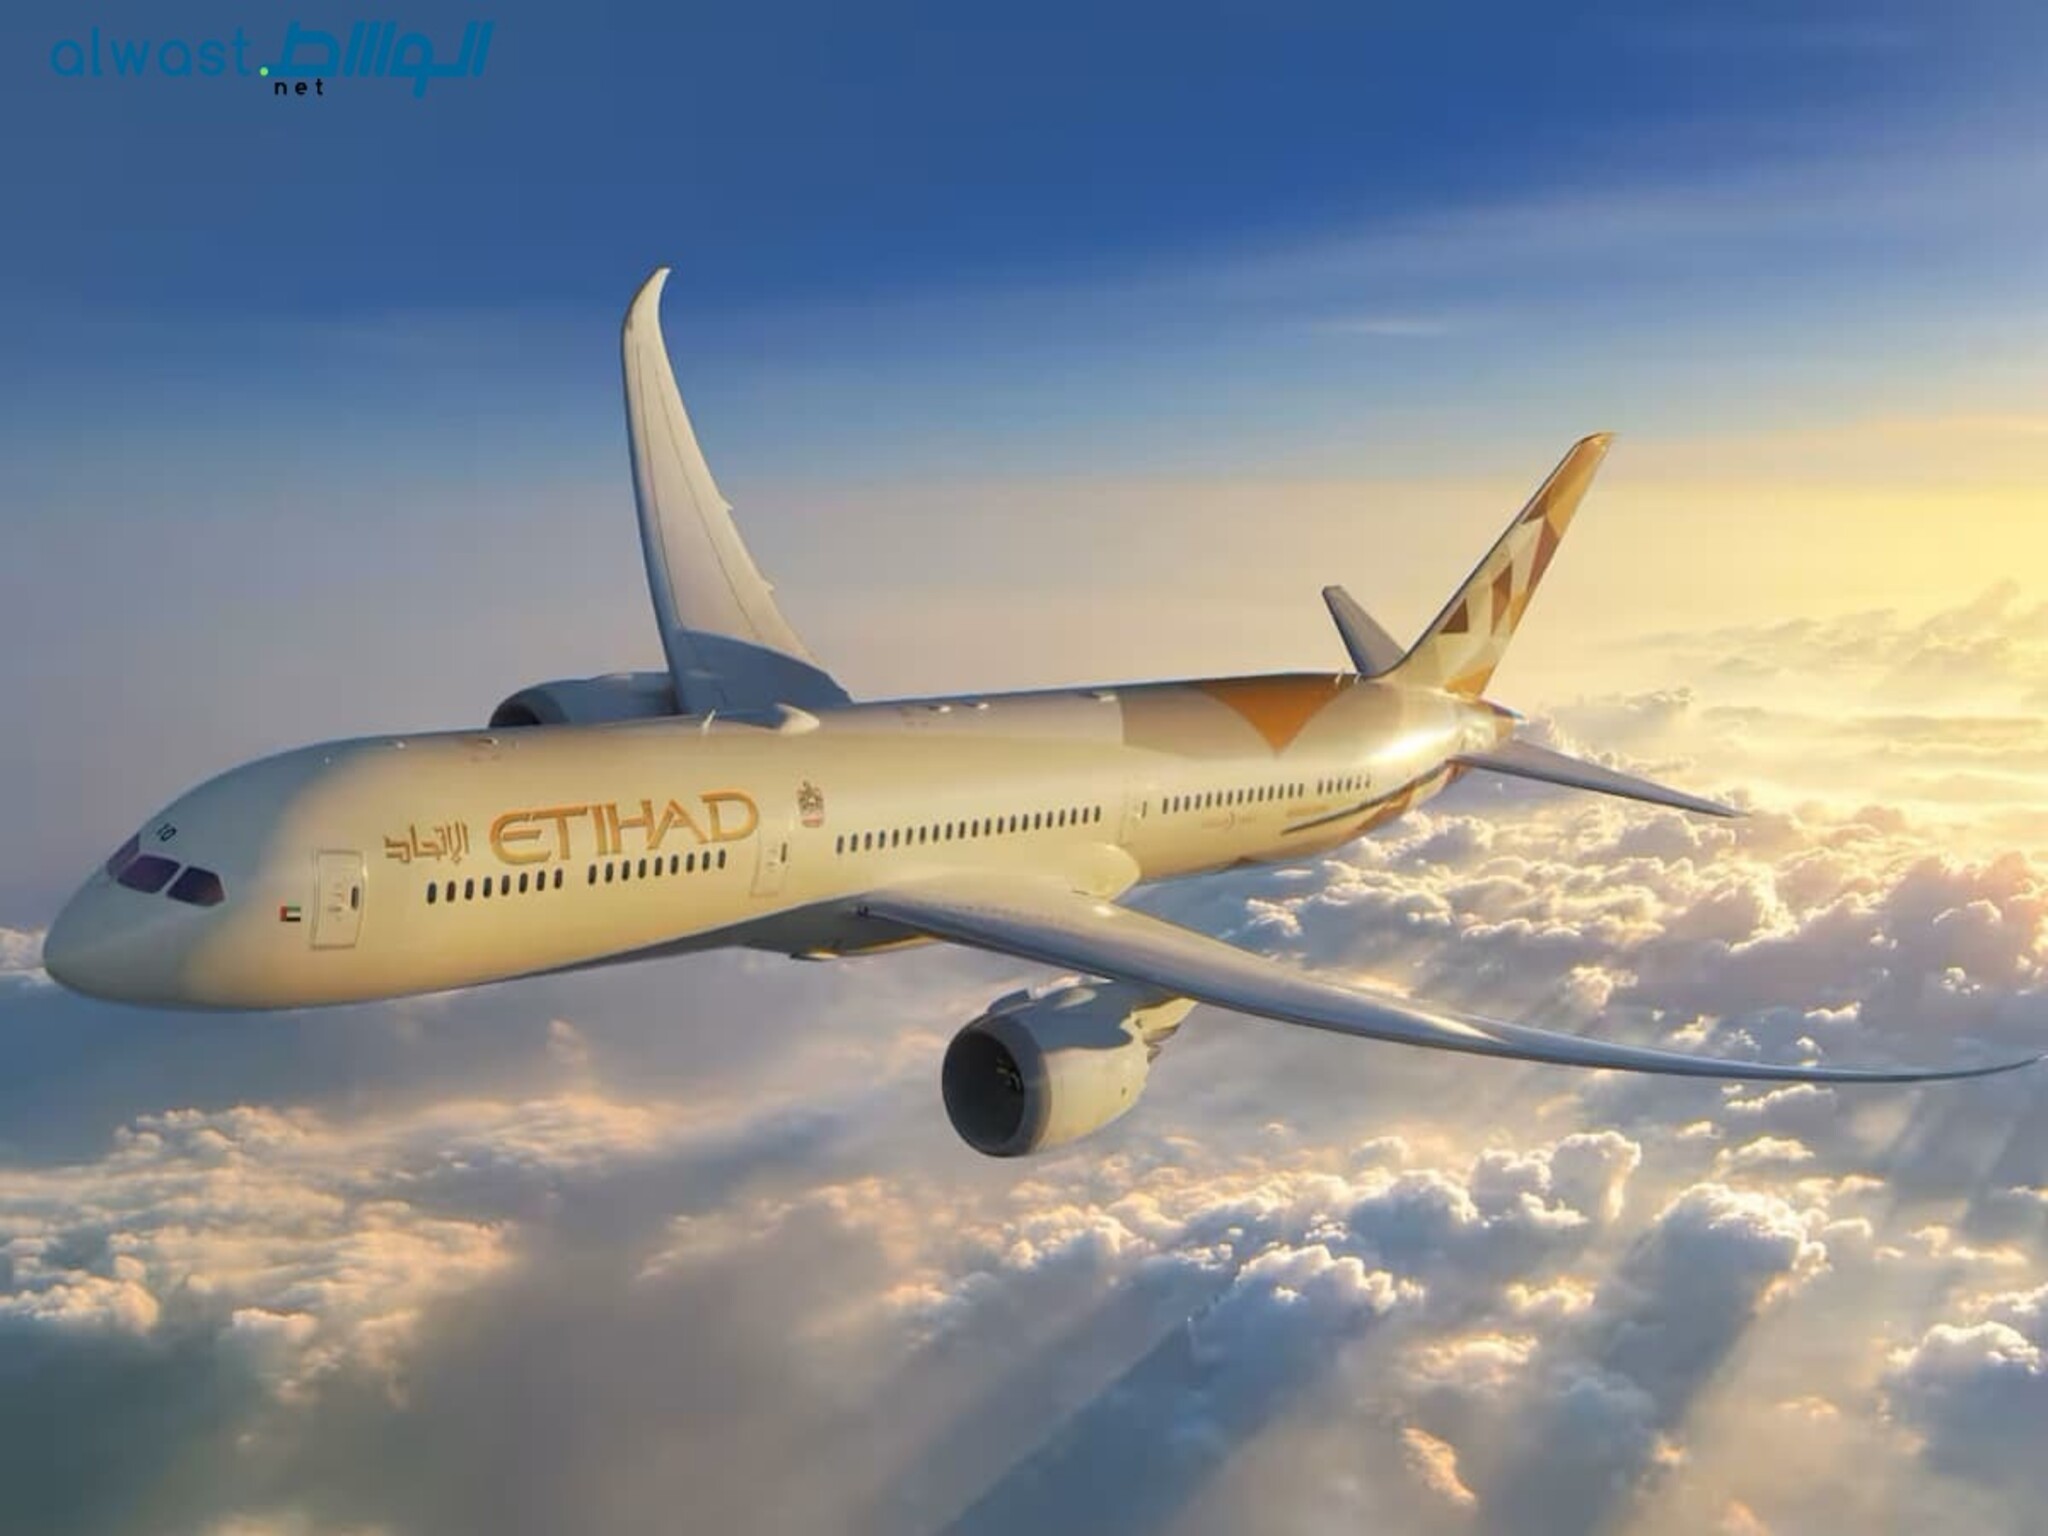 UAE: Etihad Airways Launches 8 New Routes from Abu Dhabi This Month